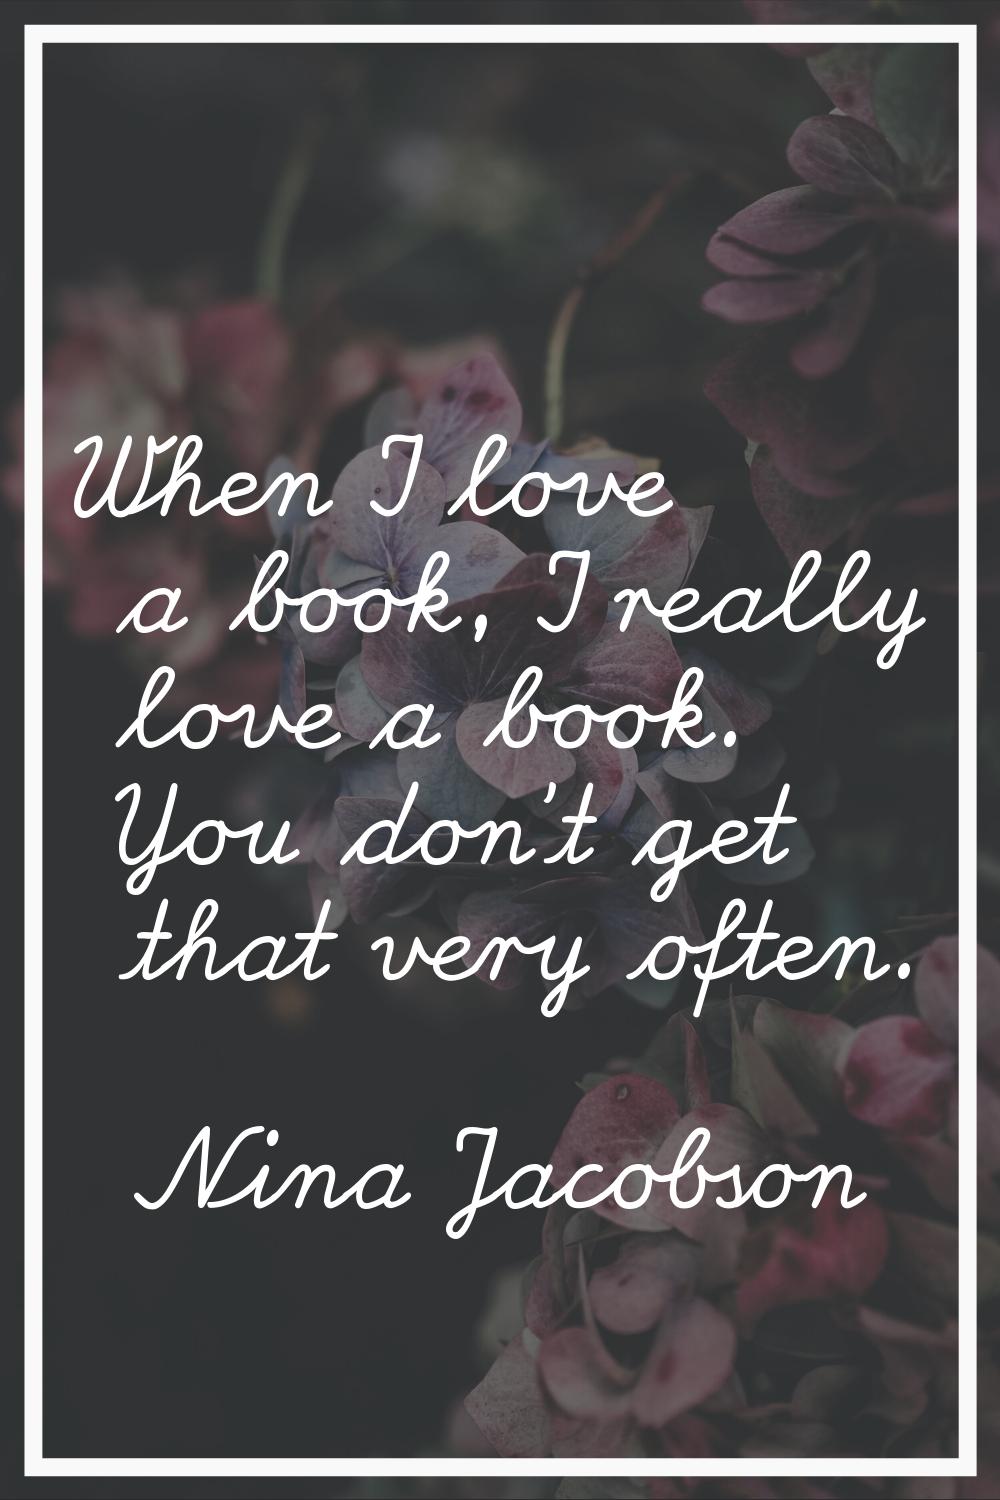 When I love a book, I really love a book. You don't get that very often.